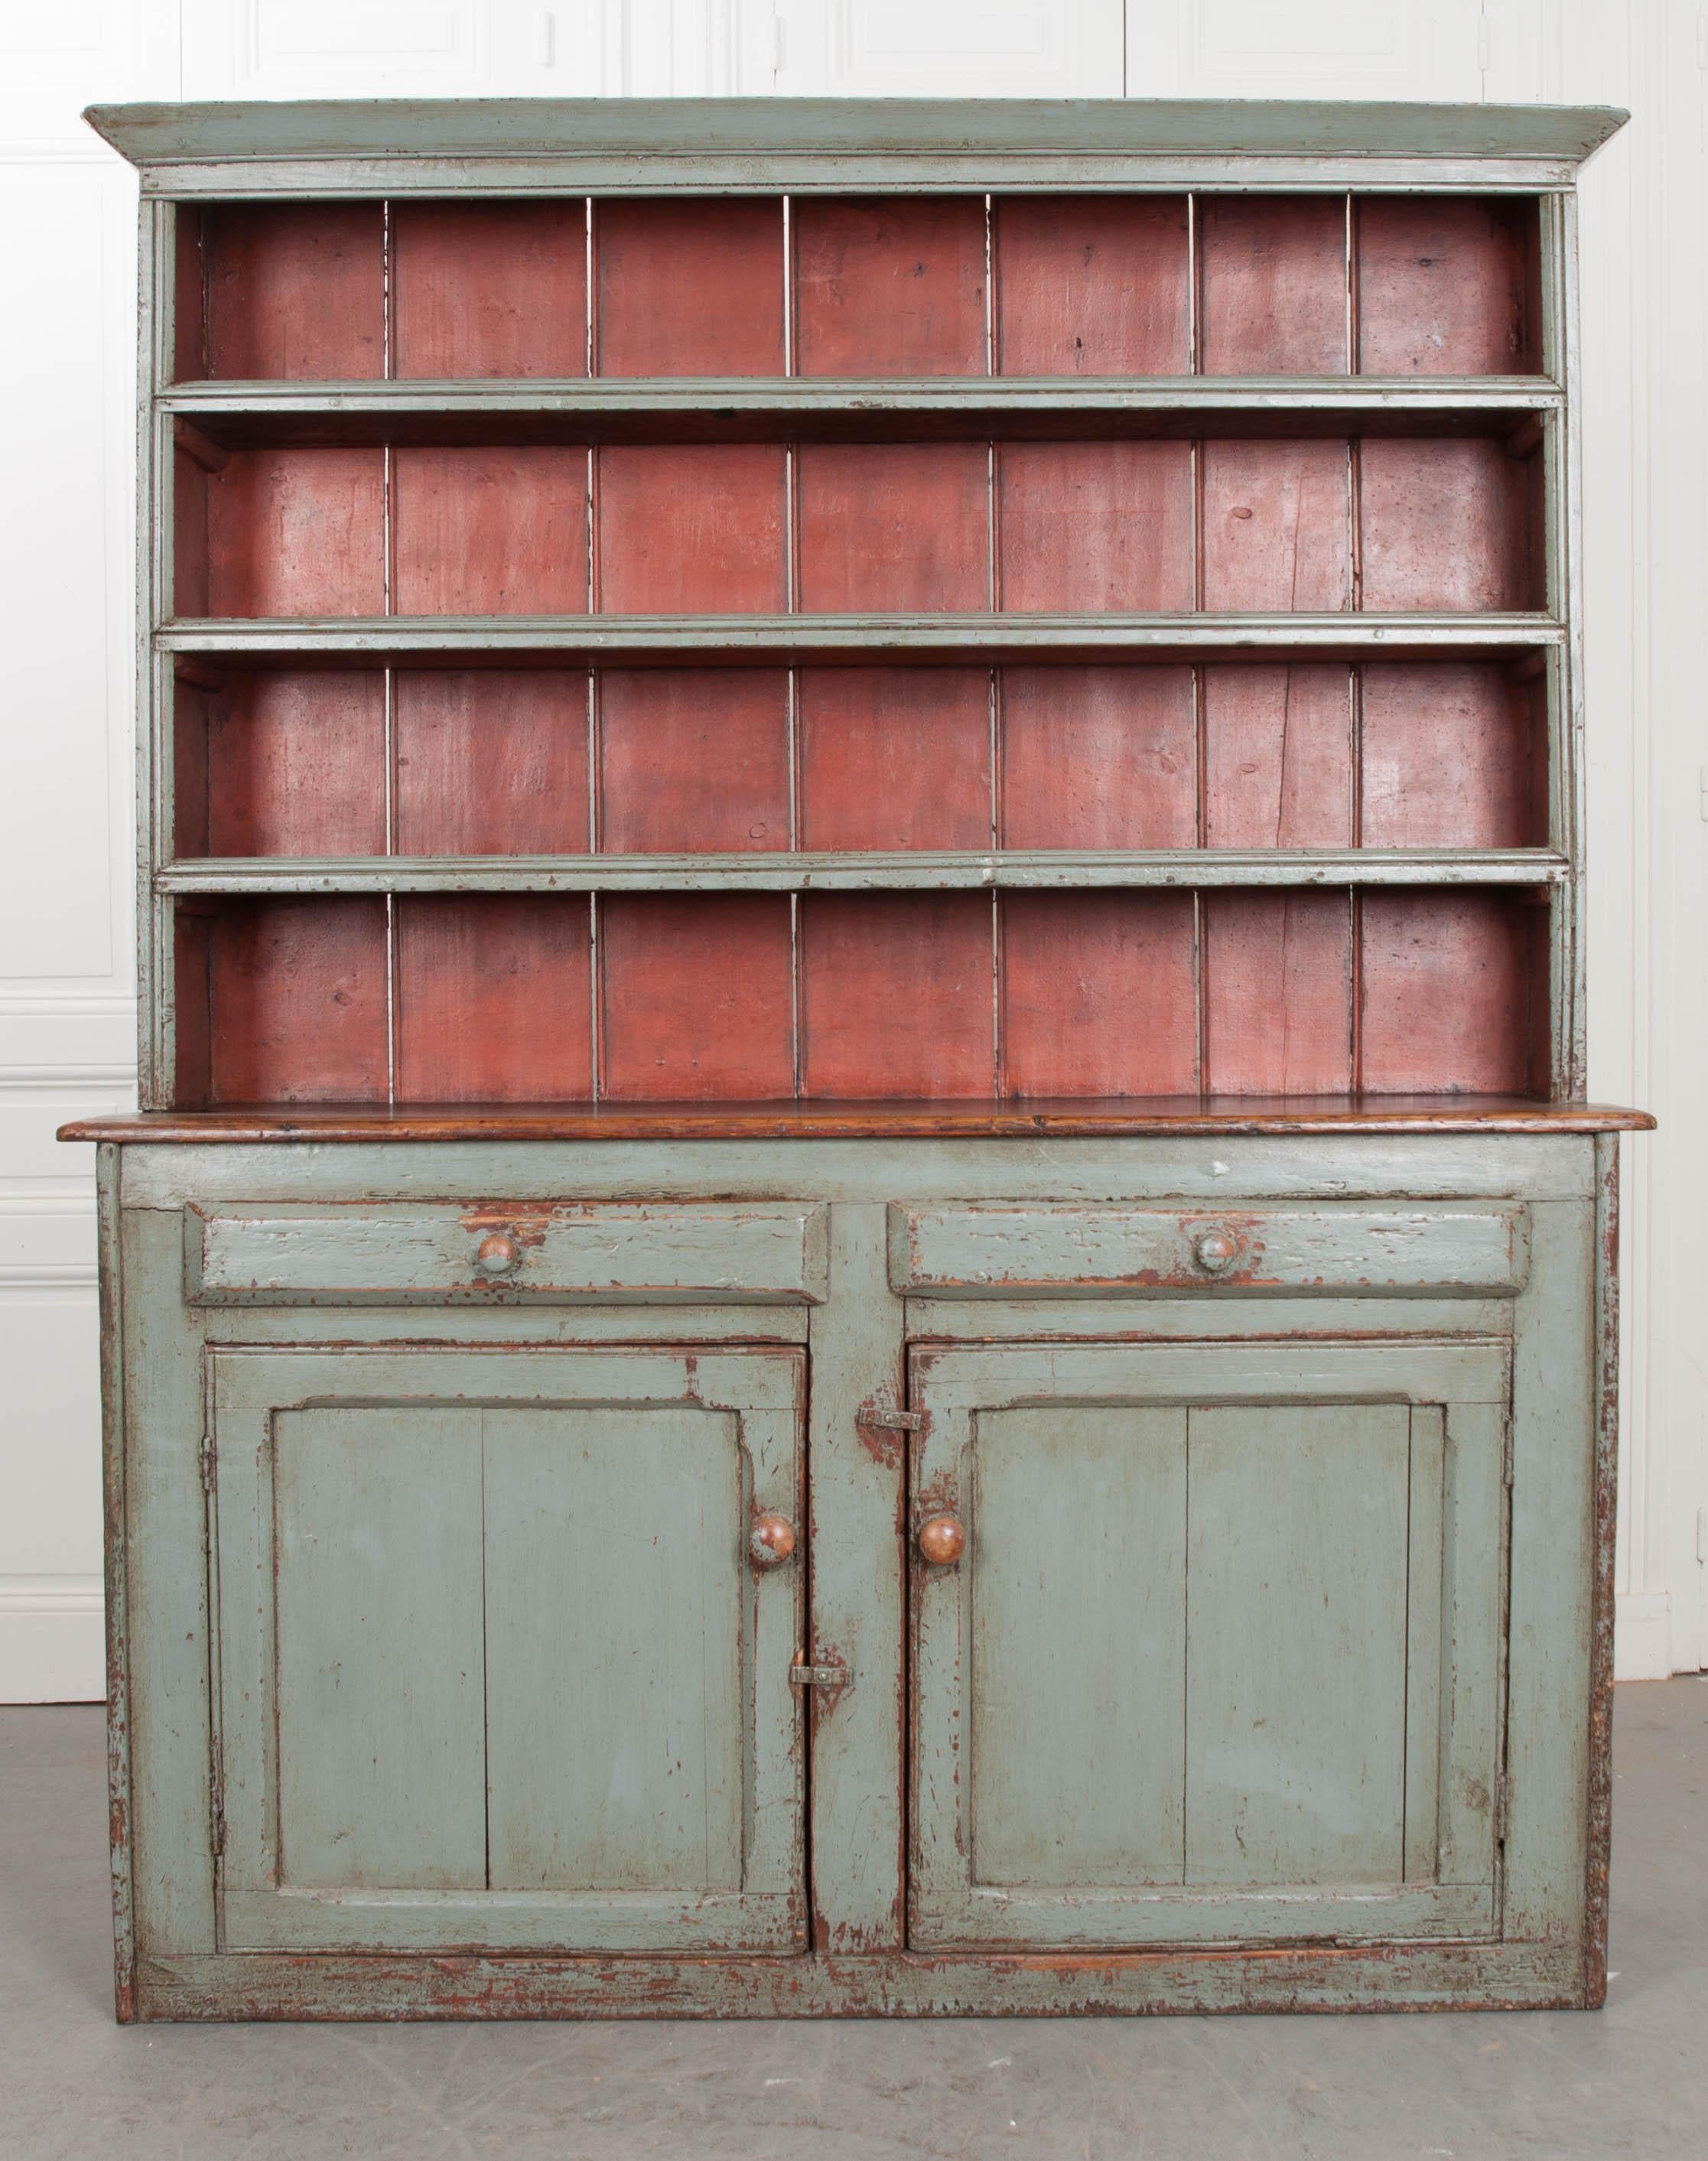 A compelling Irish dresser, with pot board made circa 1840. The polychrome antique is painted a serene teal-green with a red painted pot board backing. The painted finish is exceptionally antiqued and patinated, with natural wood becoming exposed